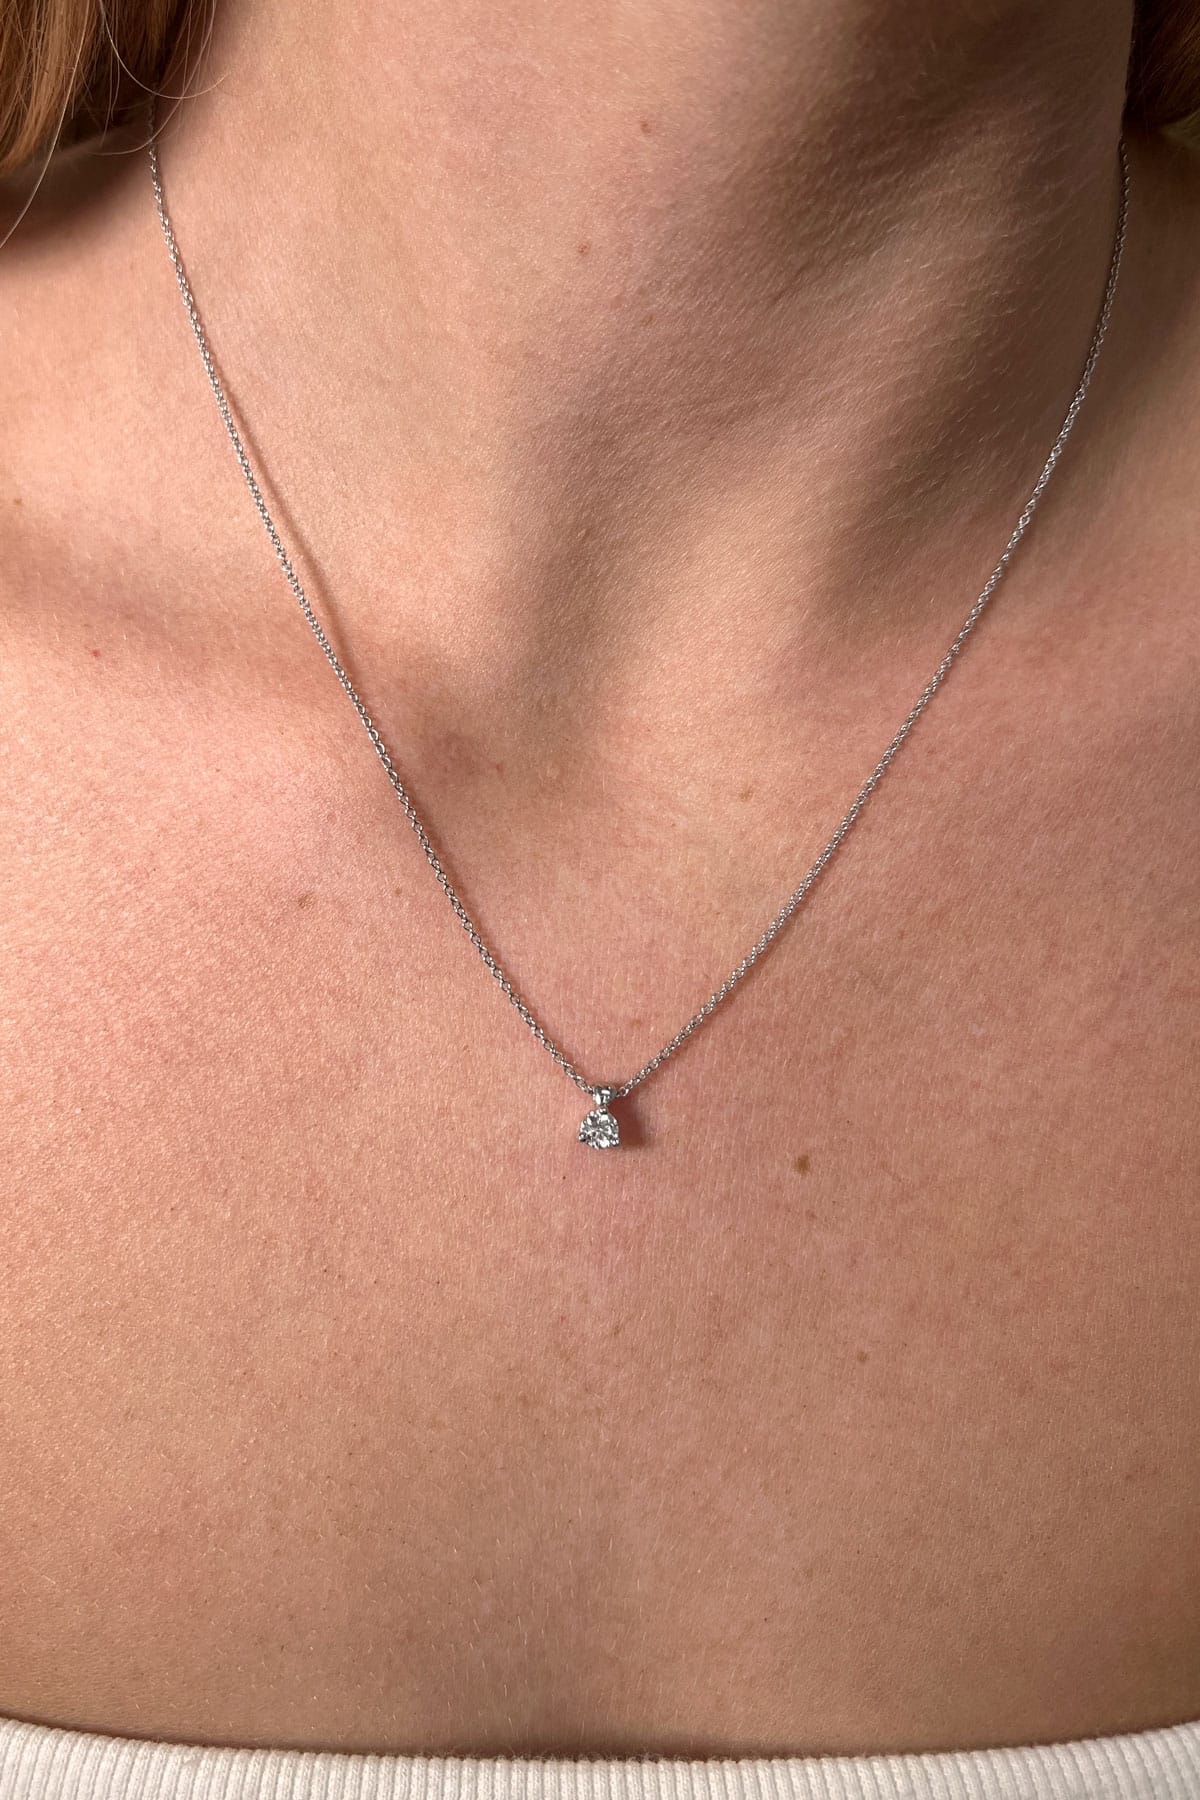 Classic 3 Prong Solitaire Pendant From Hearts On Fire available at LeGassick Diamonds and Jewellery Gold Coast, Australia.